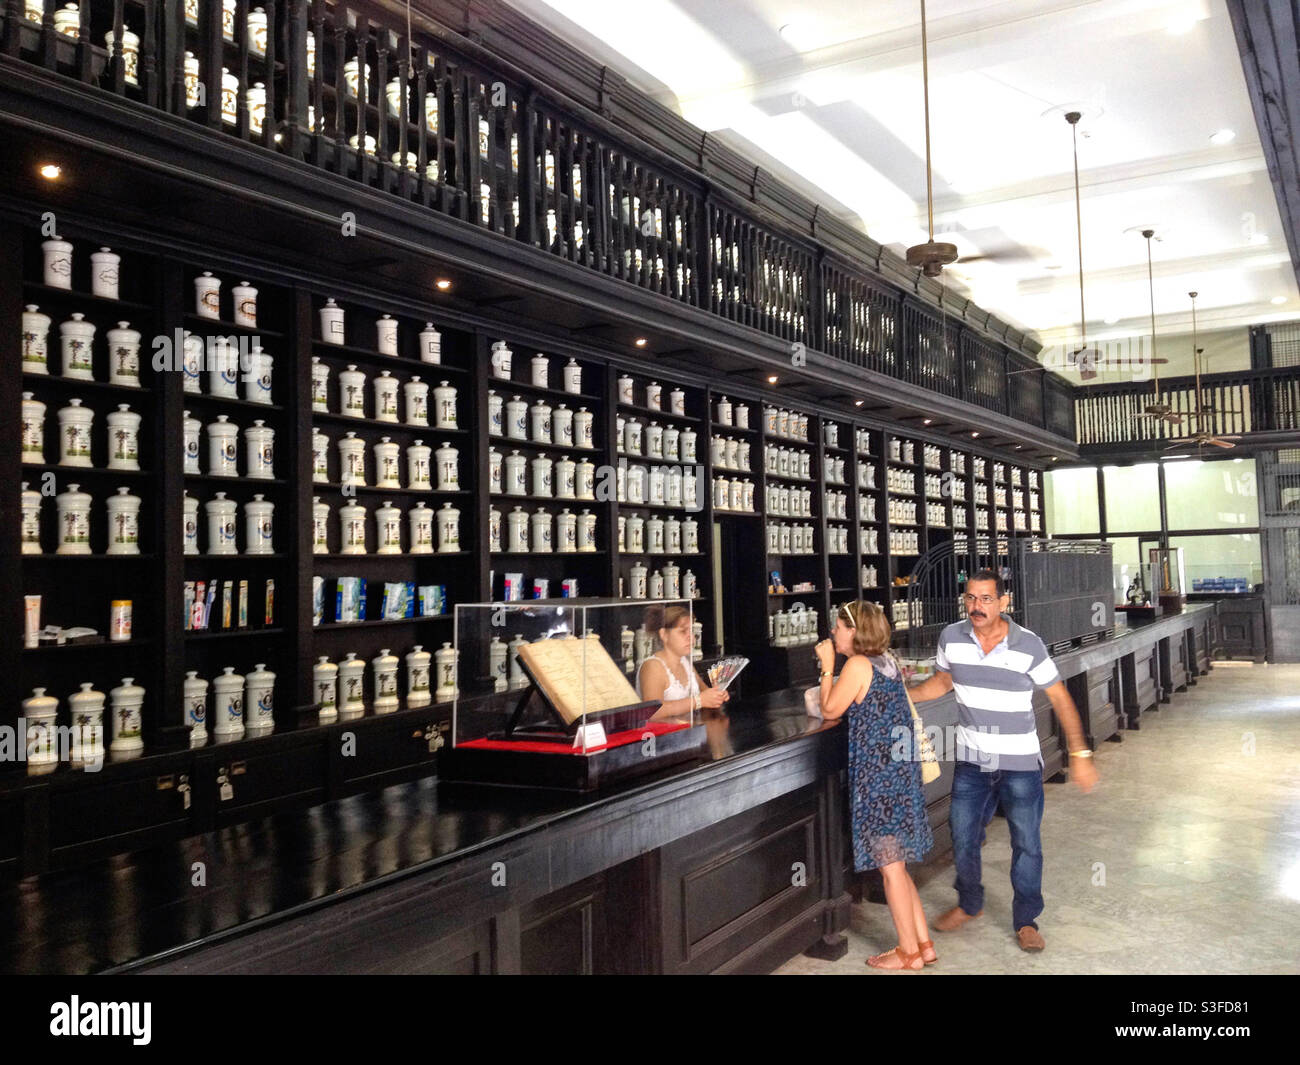 People inside an old fashioned pharmacy, chemist shop or drugstore with ceramic jars lining the wall, Havana, Cuba Stock Photo